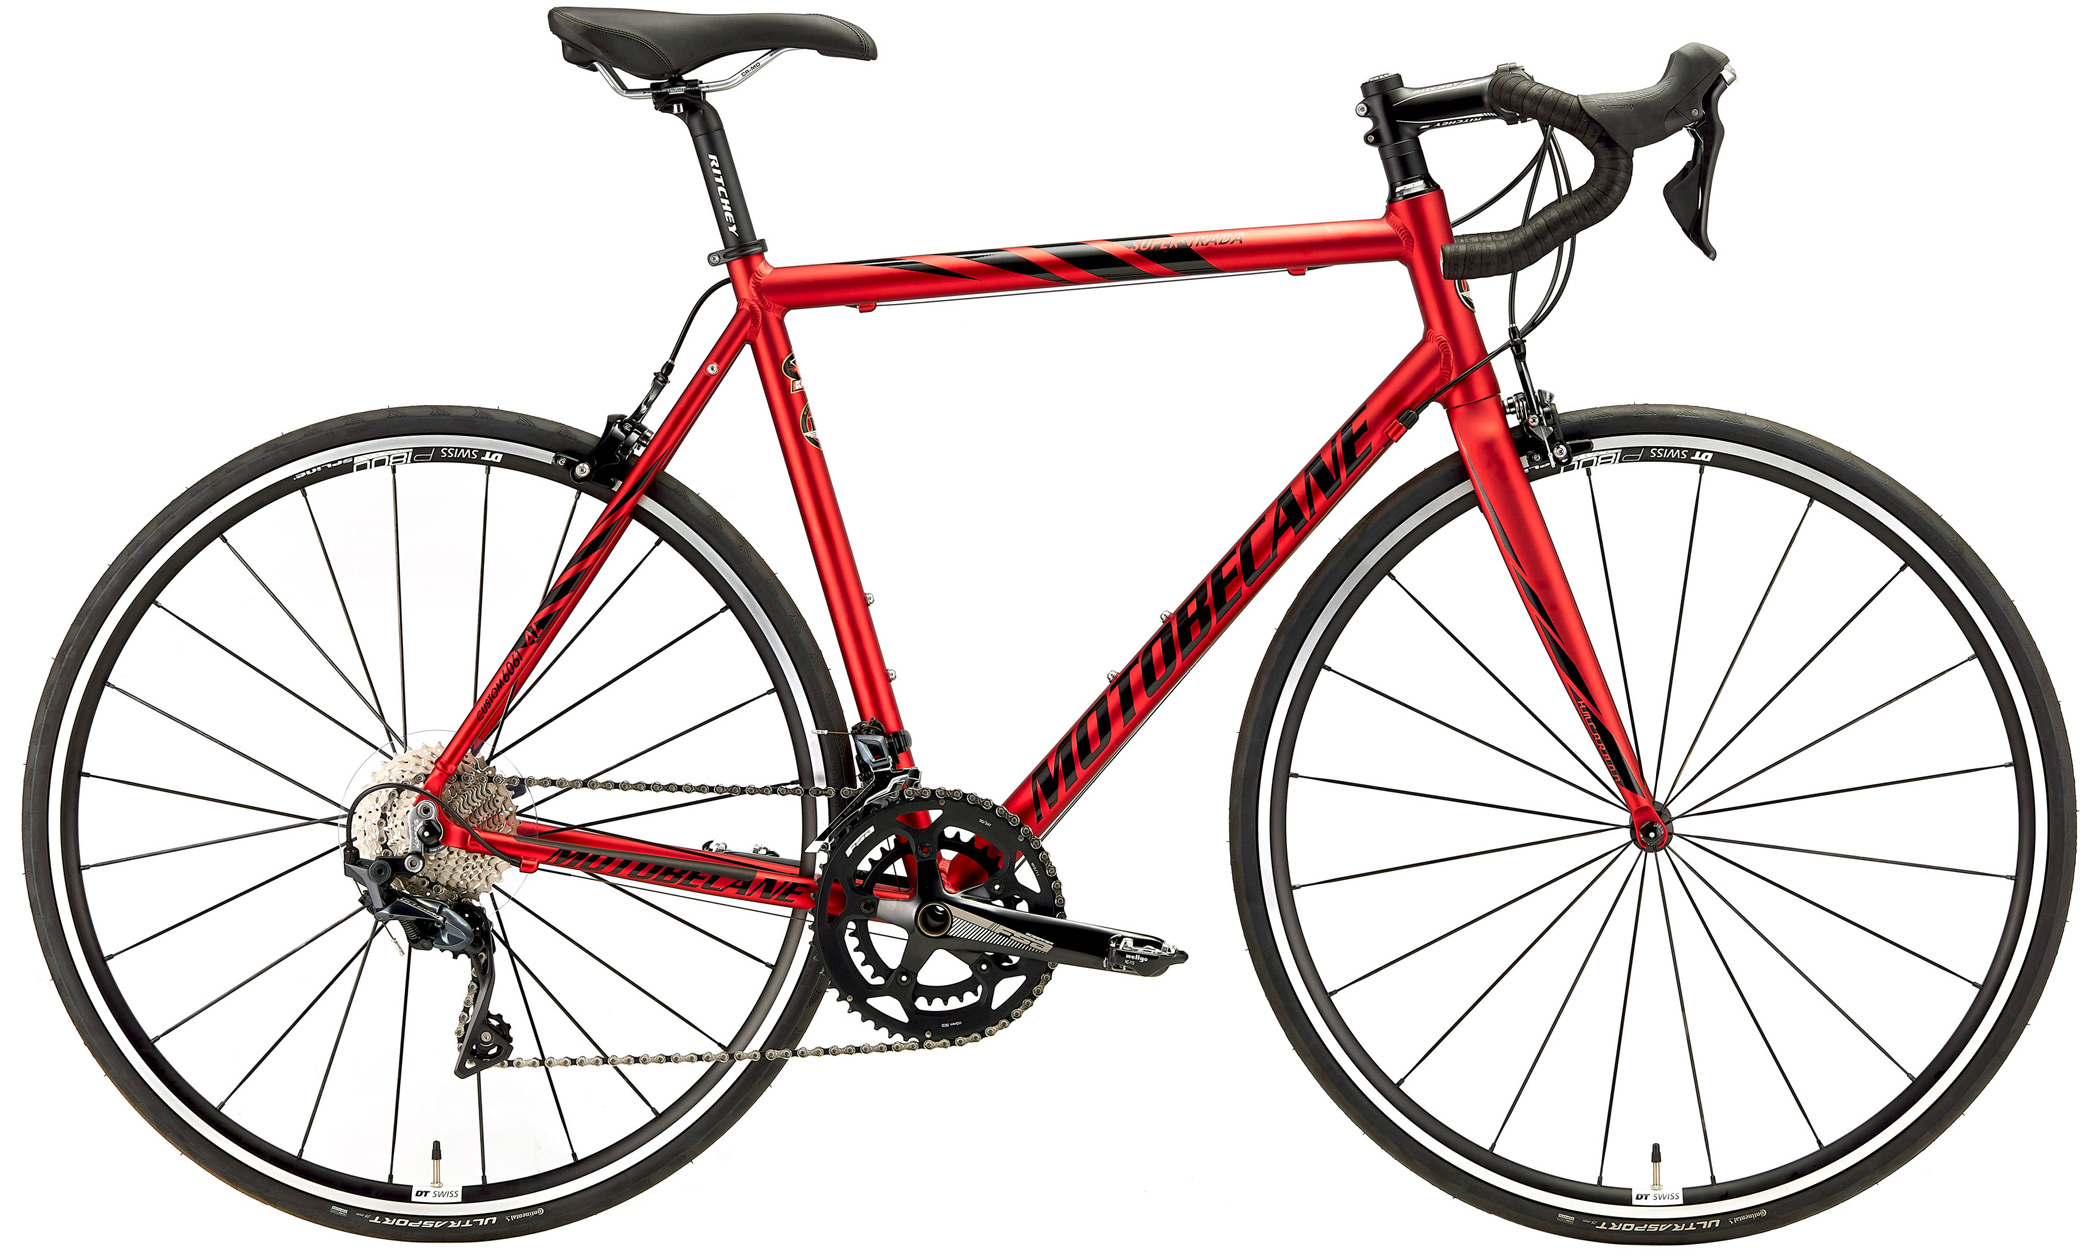 Save up to 60% of new Shimano Ultegra R8000 22 Speed Road Bikes Motobecane Super Strada Road Bikes Sale Save up to 60% off your next new Road Bike